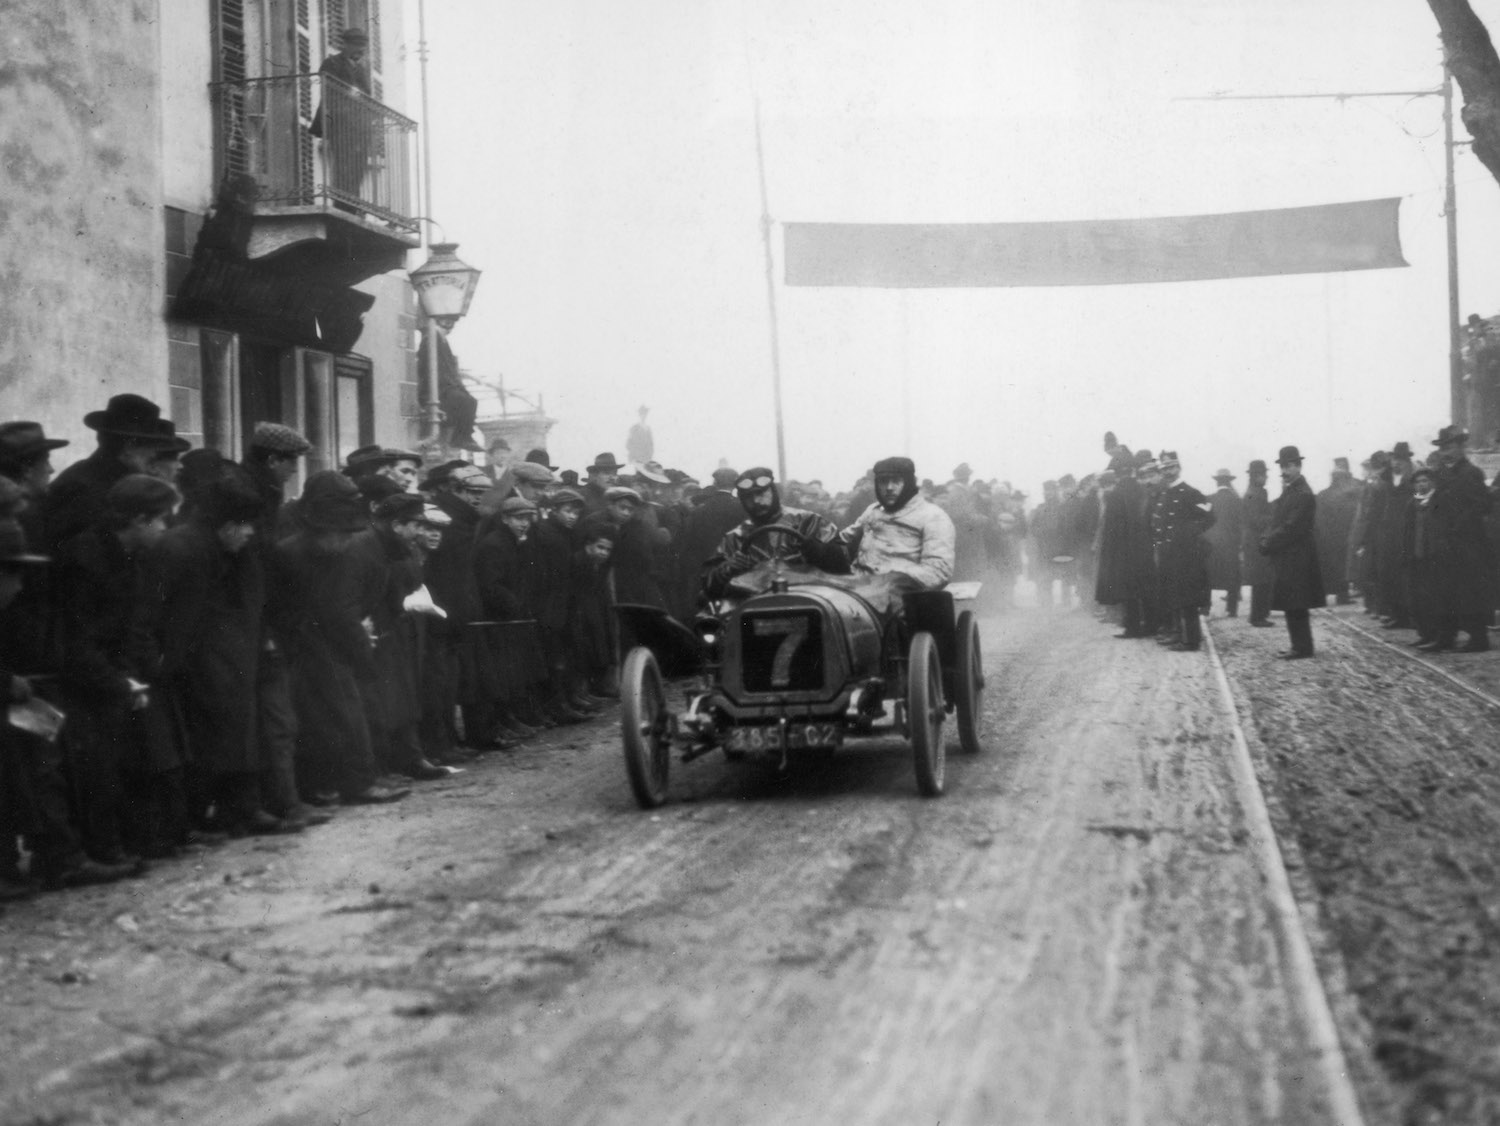 Two men finishing a race in an early Peugeot grand prix car on a muddy track, the finish line crowd visible in the background.